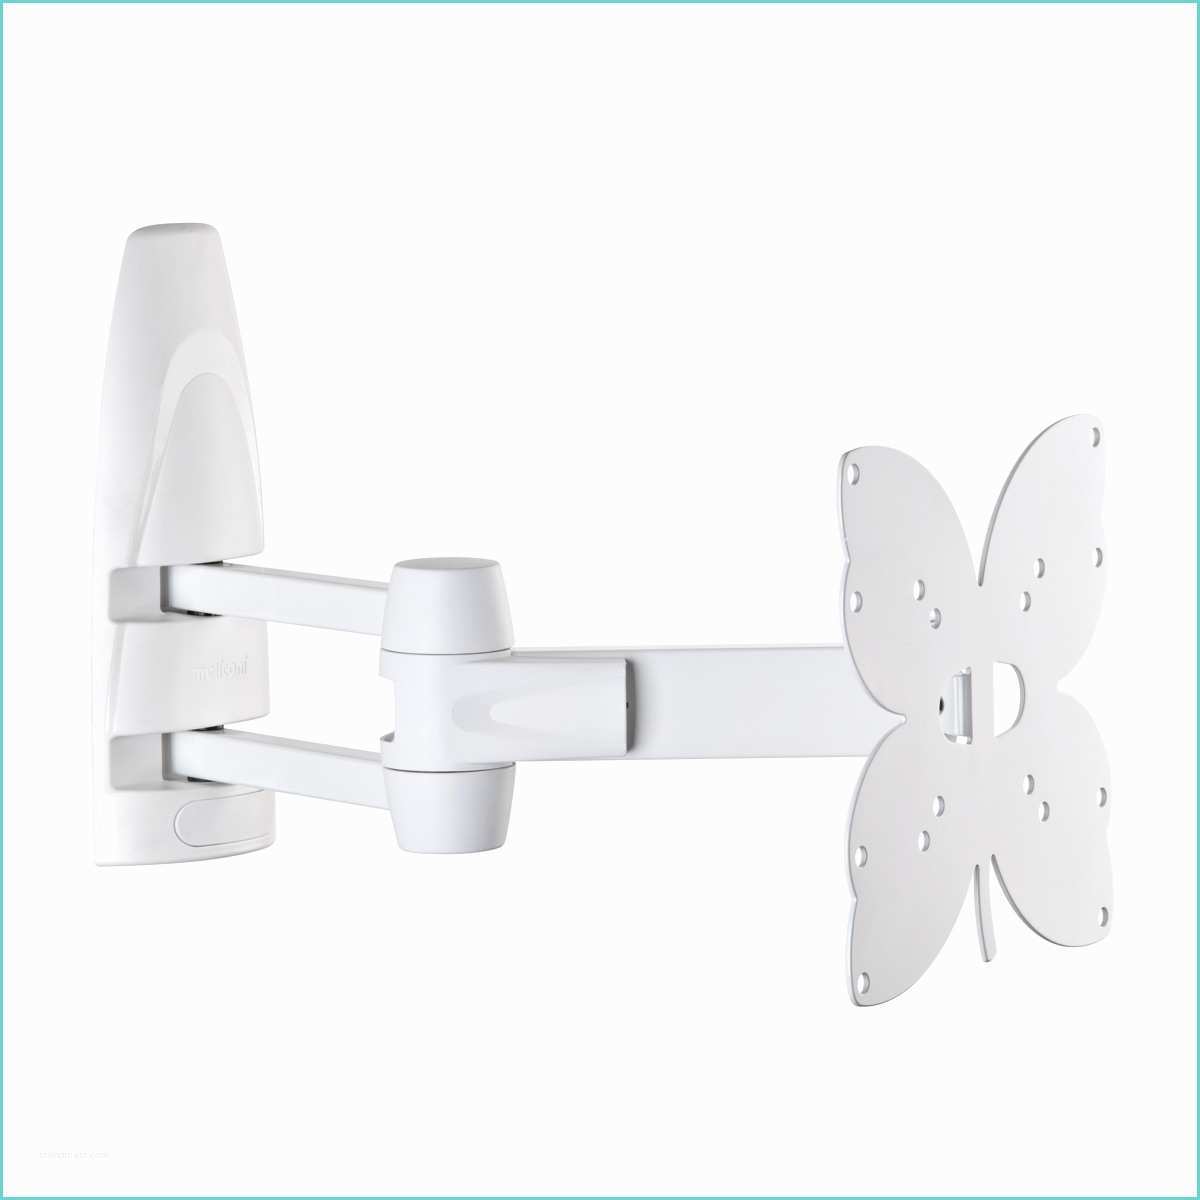 Support Mural Tv Blanc Meliconi Dr200 Blanc Achat Vente Support